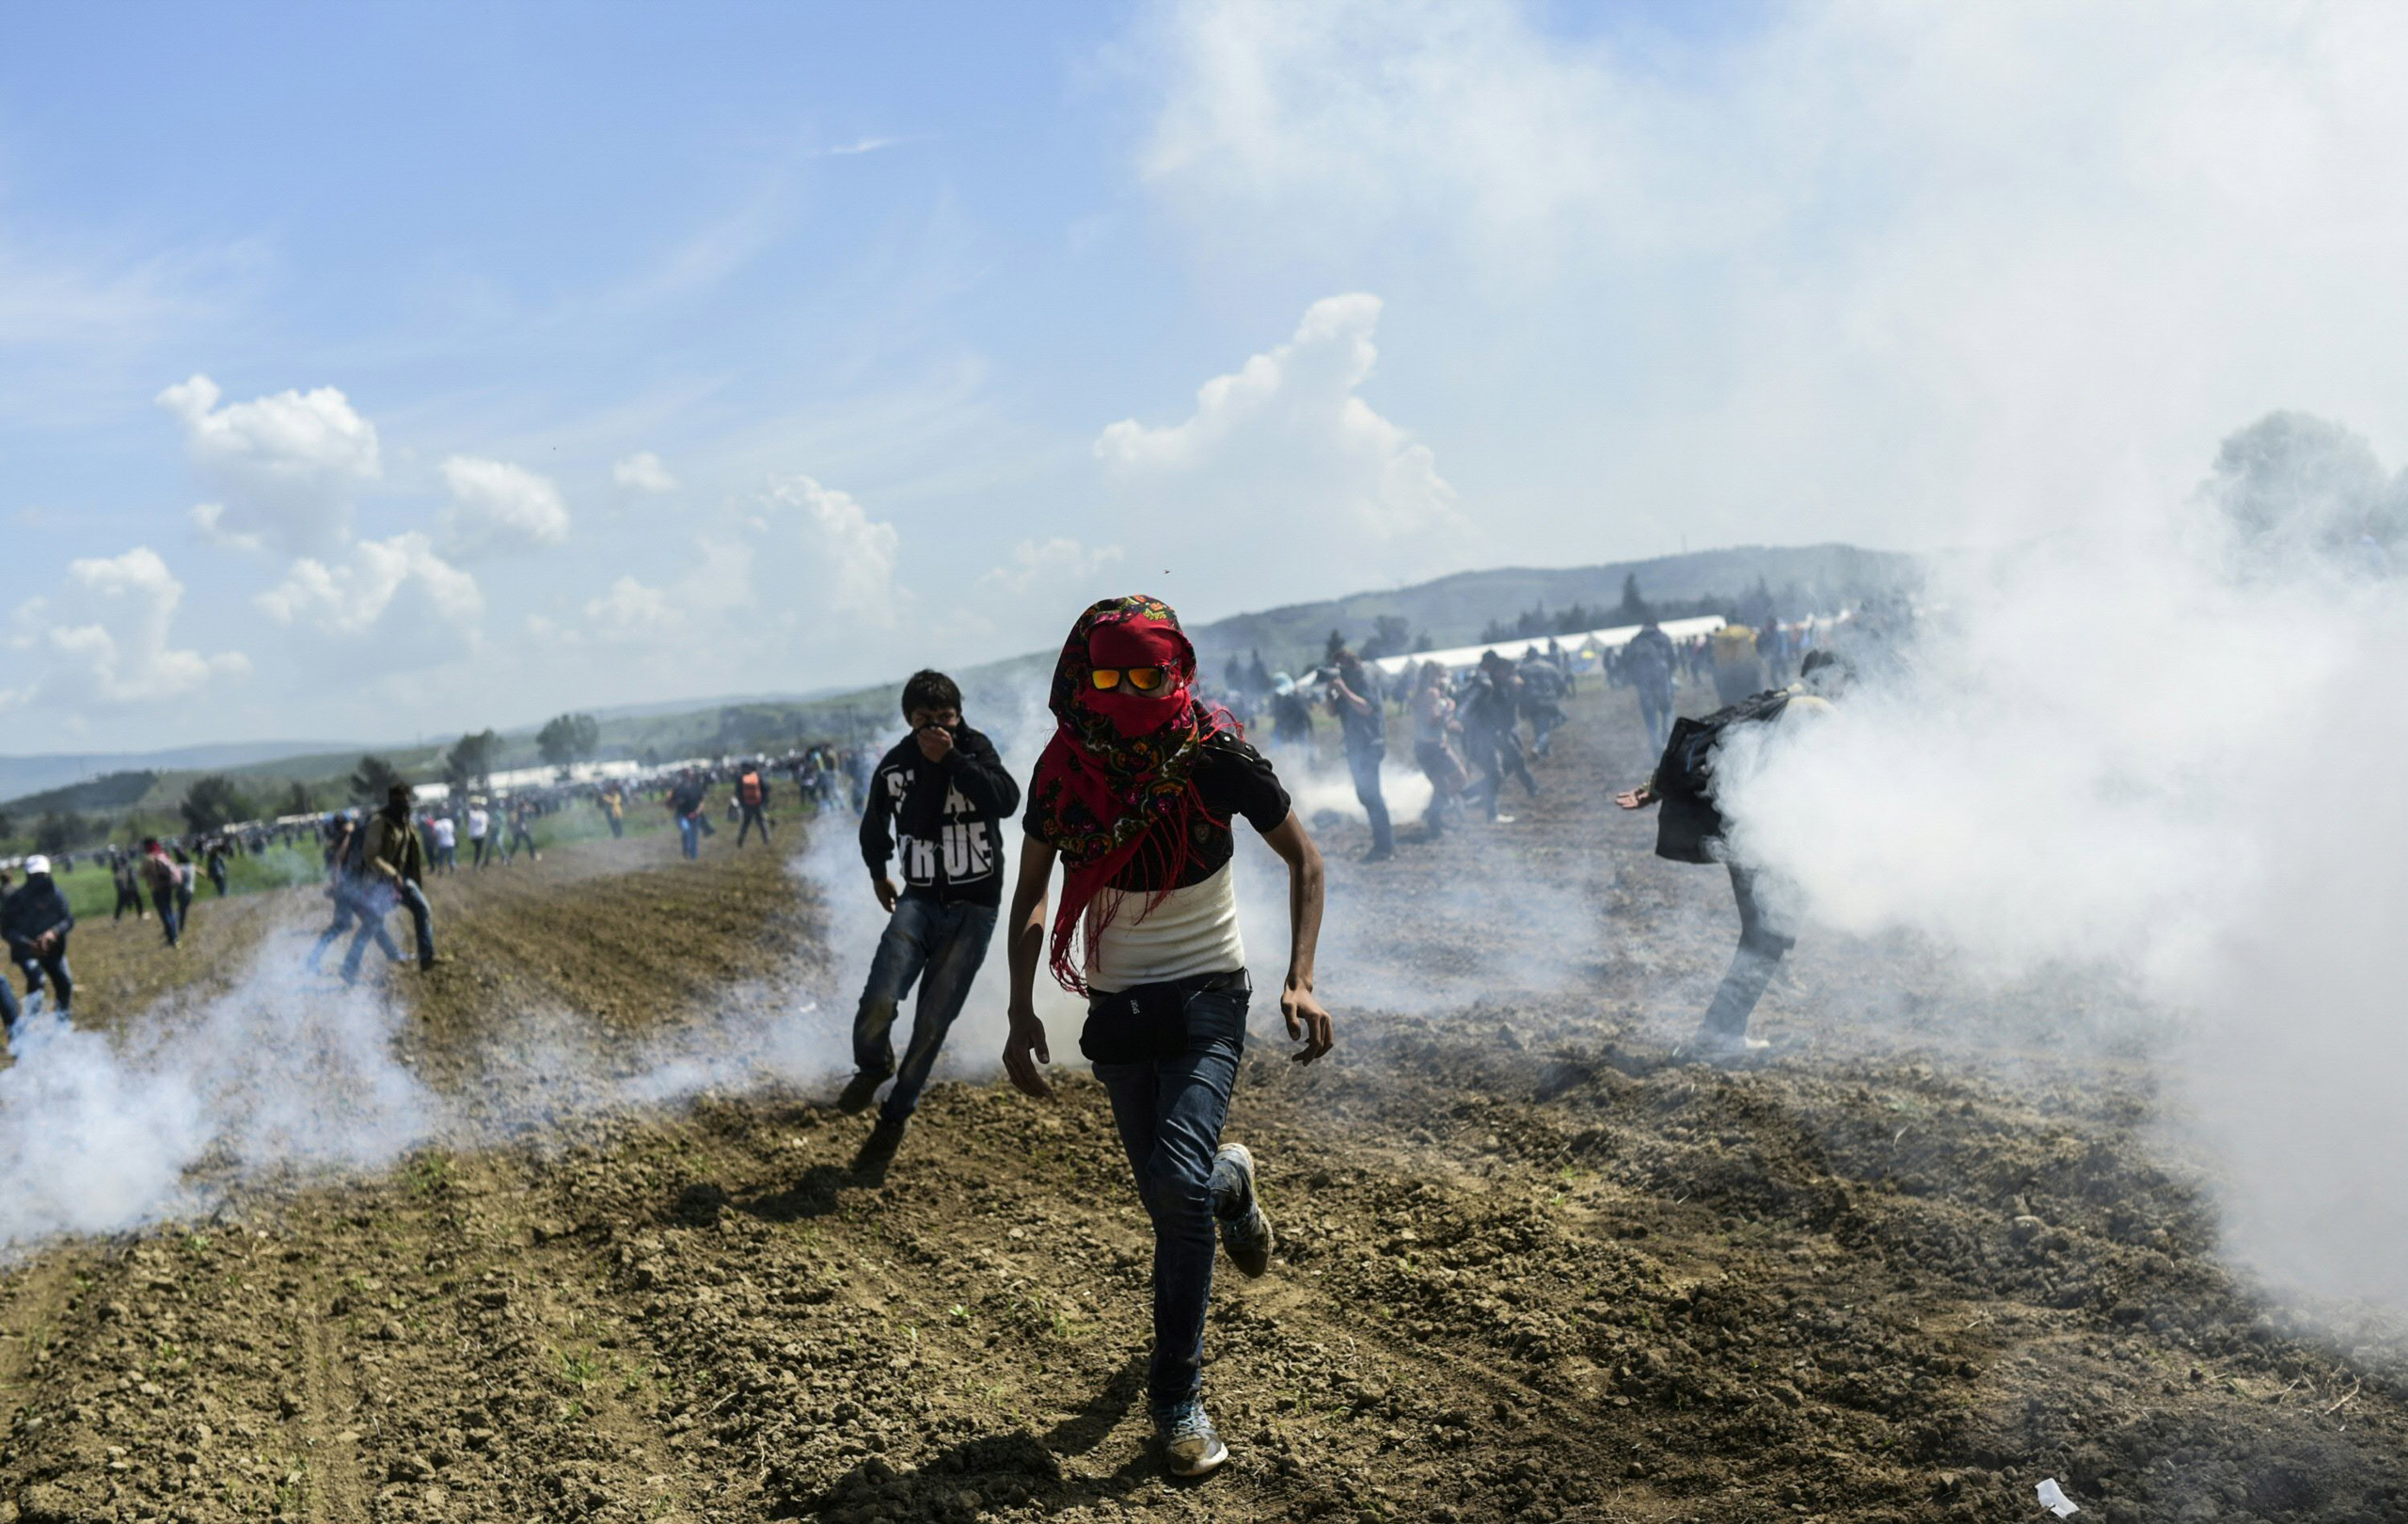 TOPSHOT - Refugees and migrants flee the tear gas as they clash with Macedonian police during a  protest to reopen the border near their makeshift camp in the northern Greek border village of Idomeni, on April 10, 2016. Dozens of people were hurt when police fired tear gas on a group of migrants as they tried to break through a fence on the Greece-Macedonia border, the medical charity Doctors without Borders (MSF) said. A plan to send back migrants from Greece to Turkey sparked demonstrations by local residents in both countries days before the deal brokered by the European Union is set to be implemented. / AFP PHOTO / BULENT KILICBULENT KILIC/AFP/Getty Images